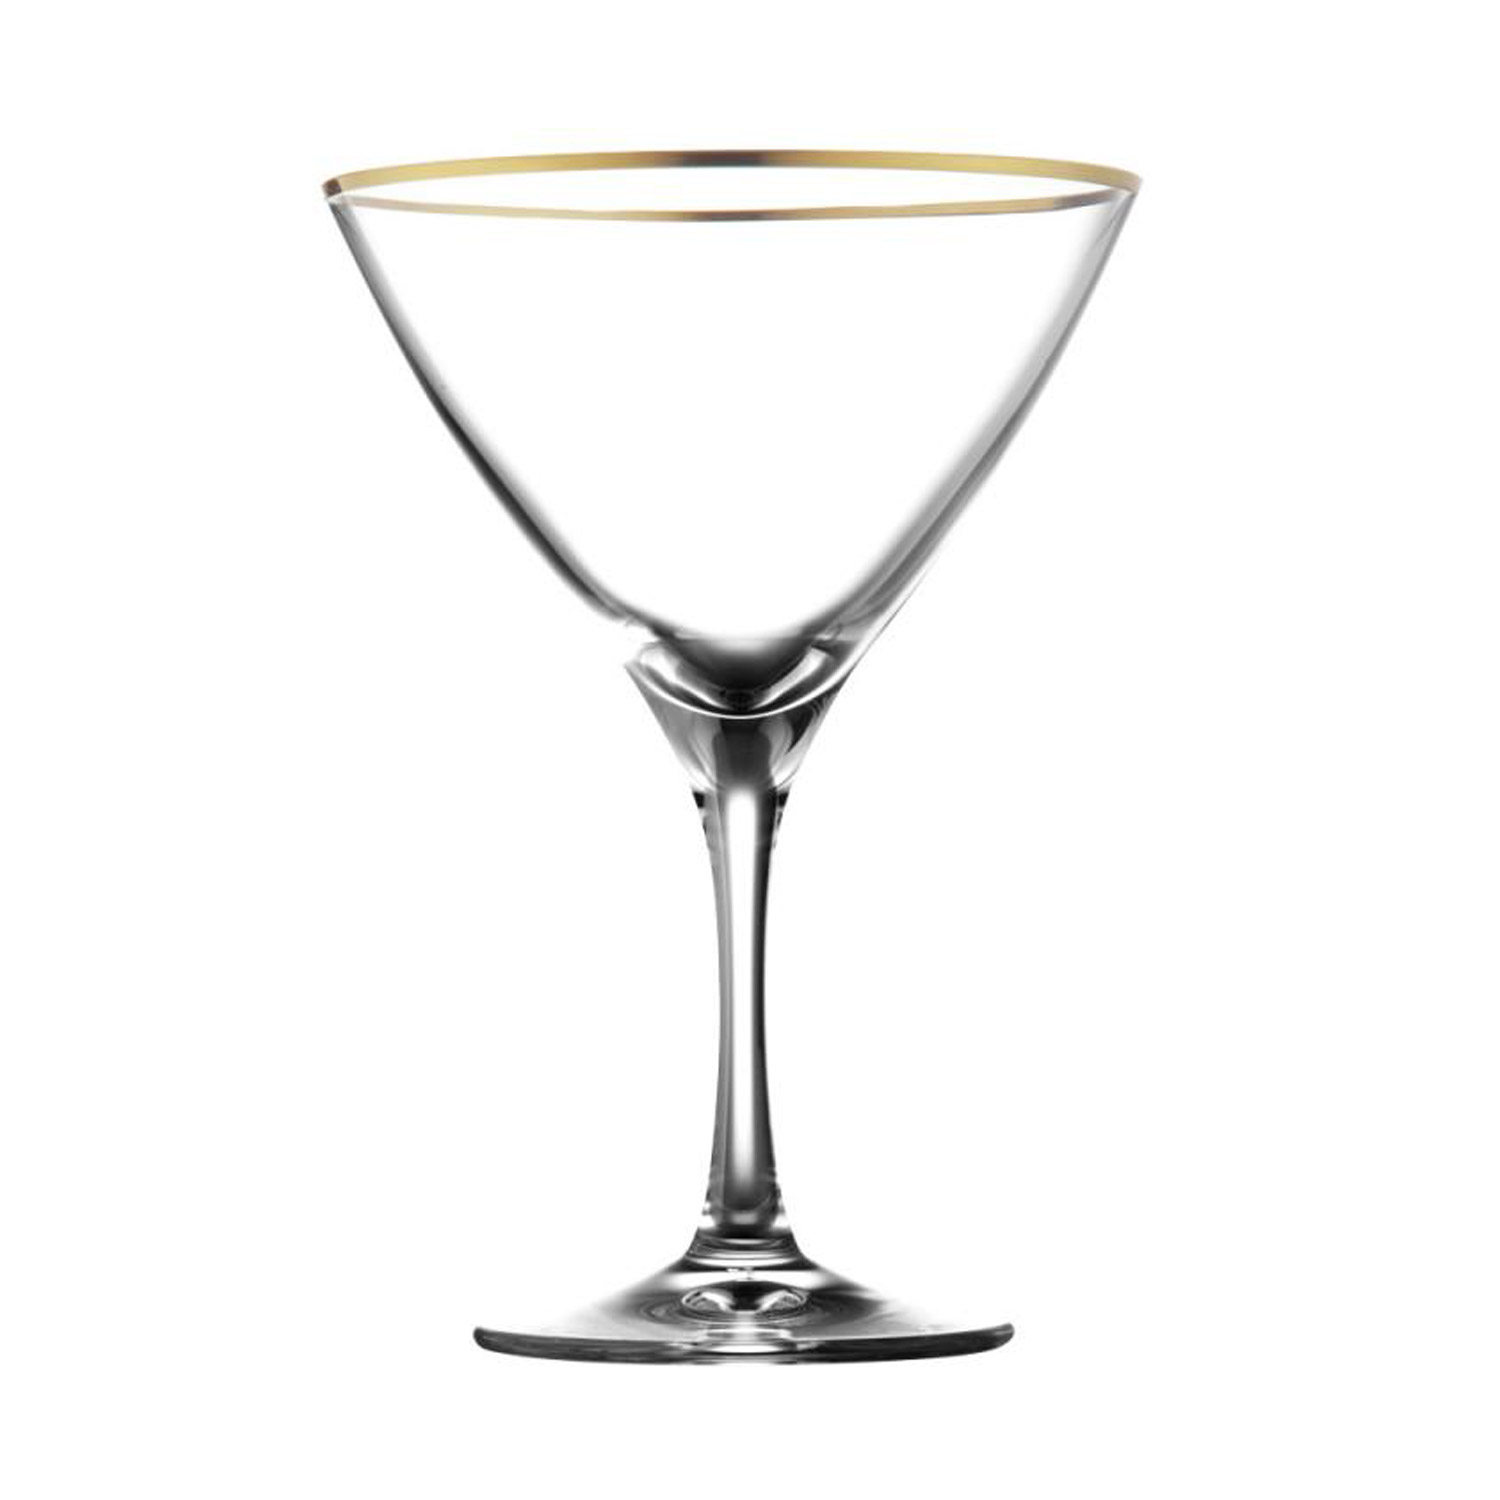 Cocktailglas Kristall Pure Gold clear (17,4 cm)